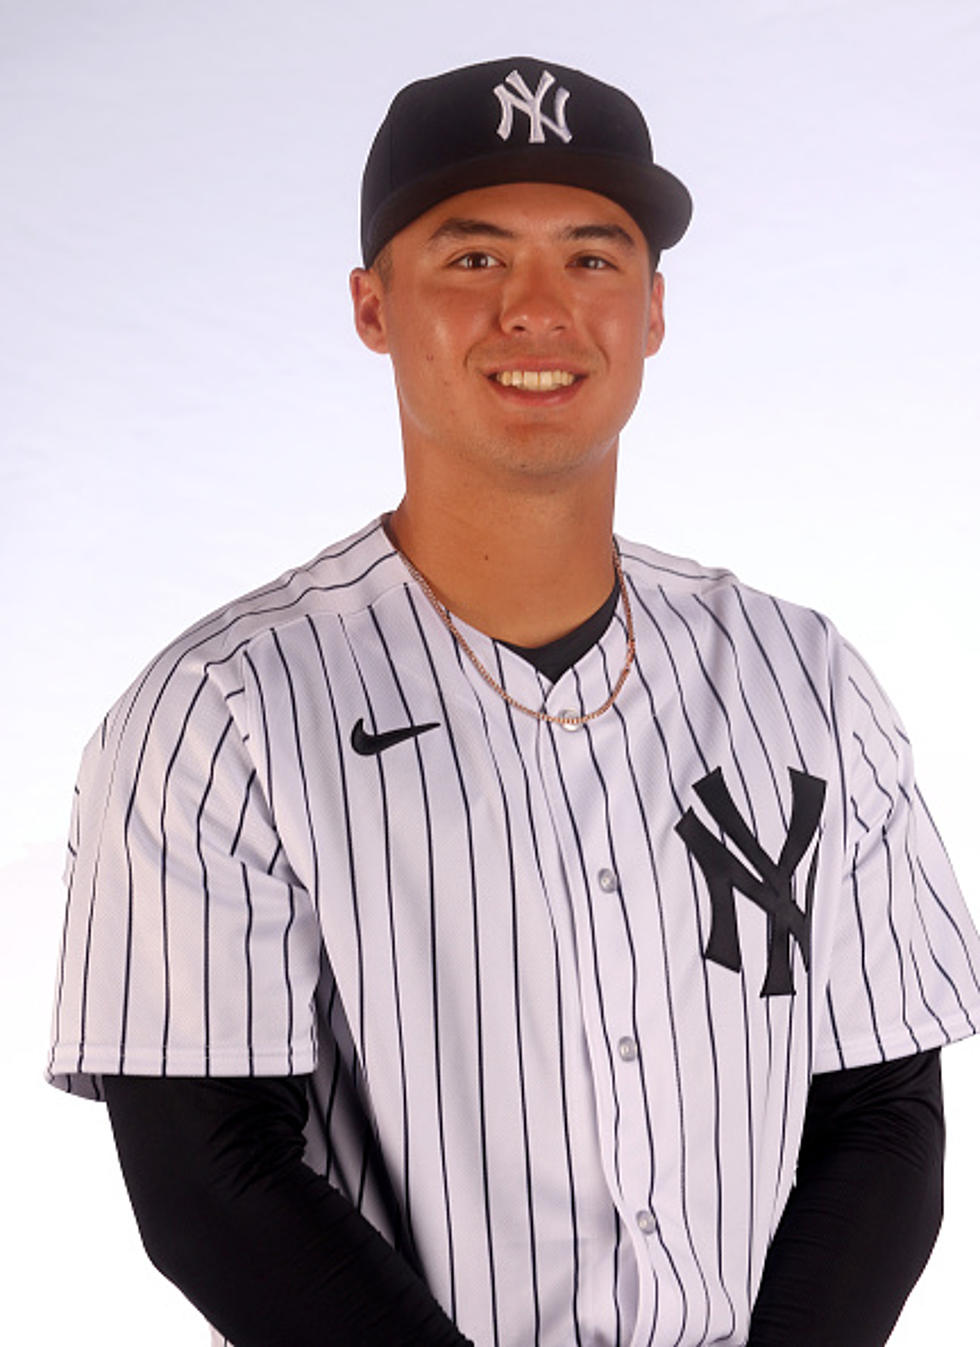 Anthony Volpe named Yankees' Opening Day 2023 shortstop